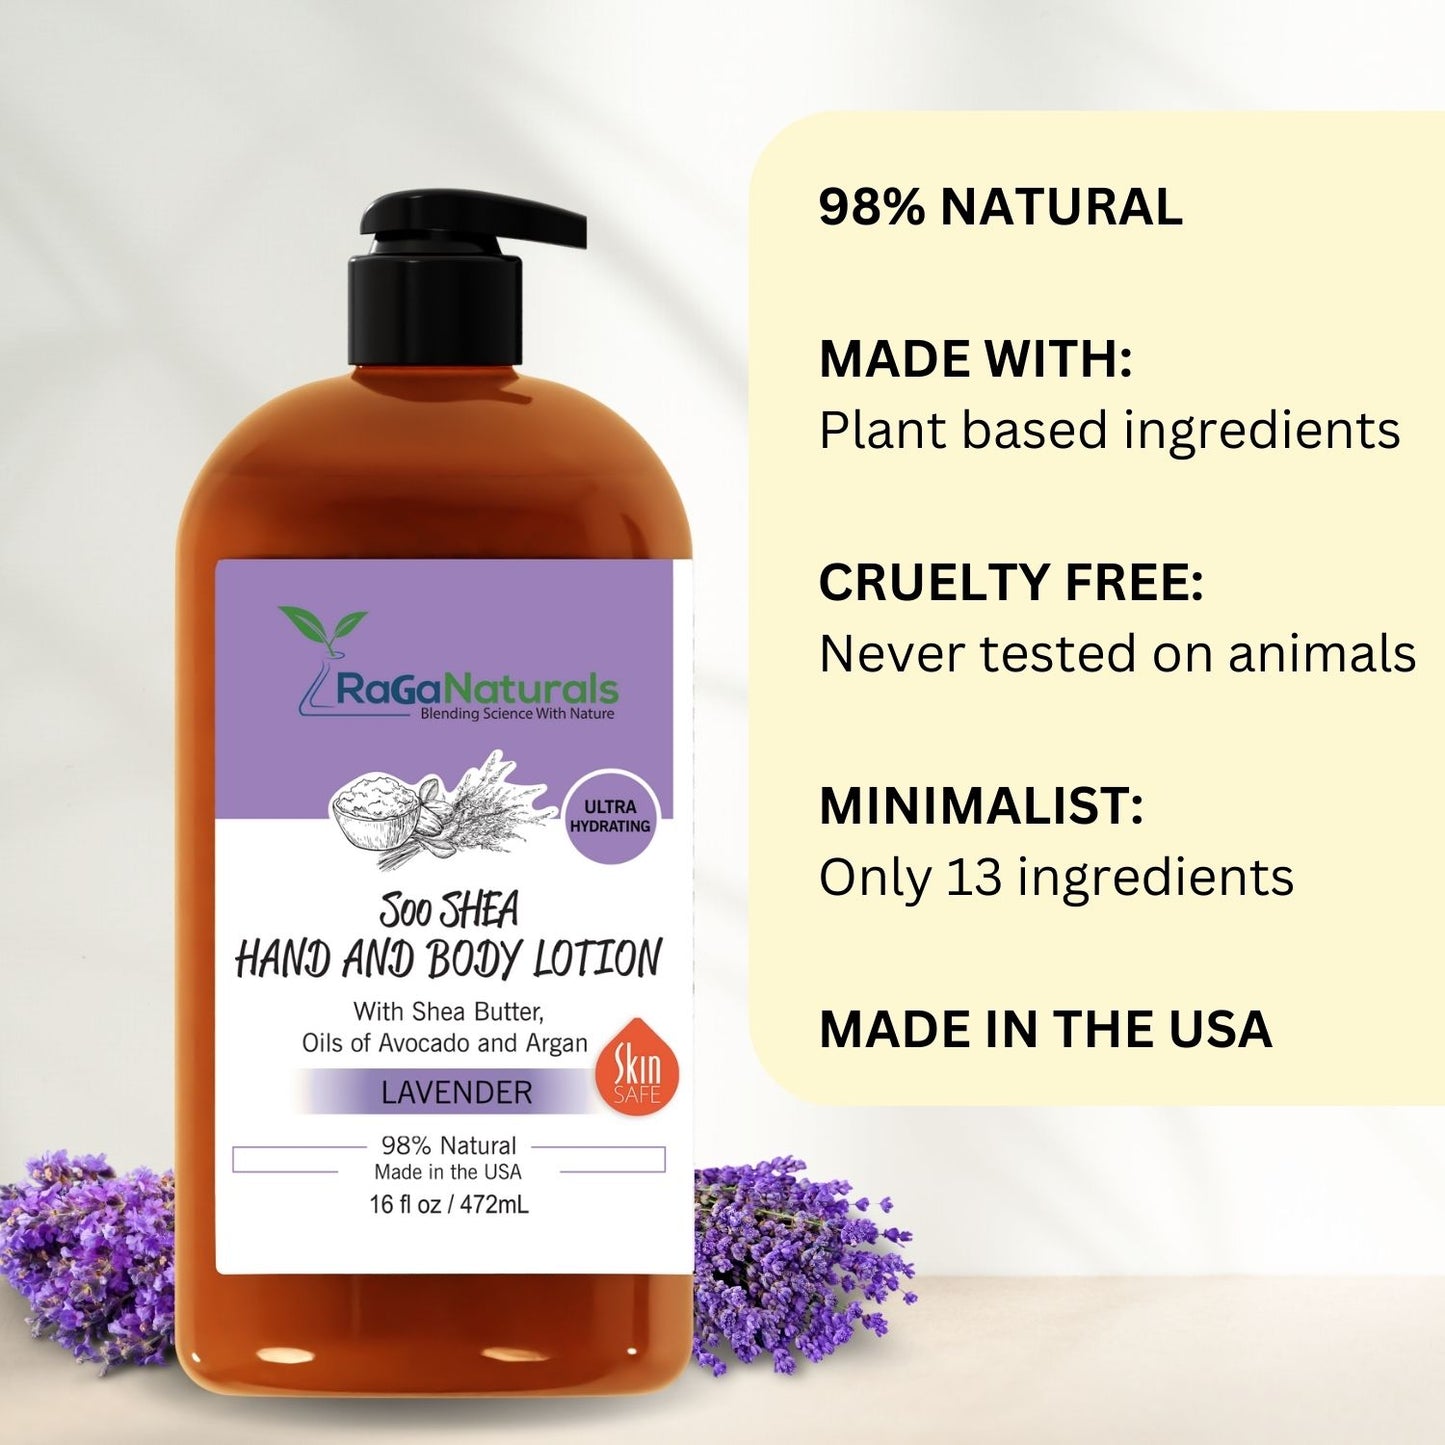 Lavender Hand and Body Lotion - 16fl oz